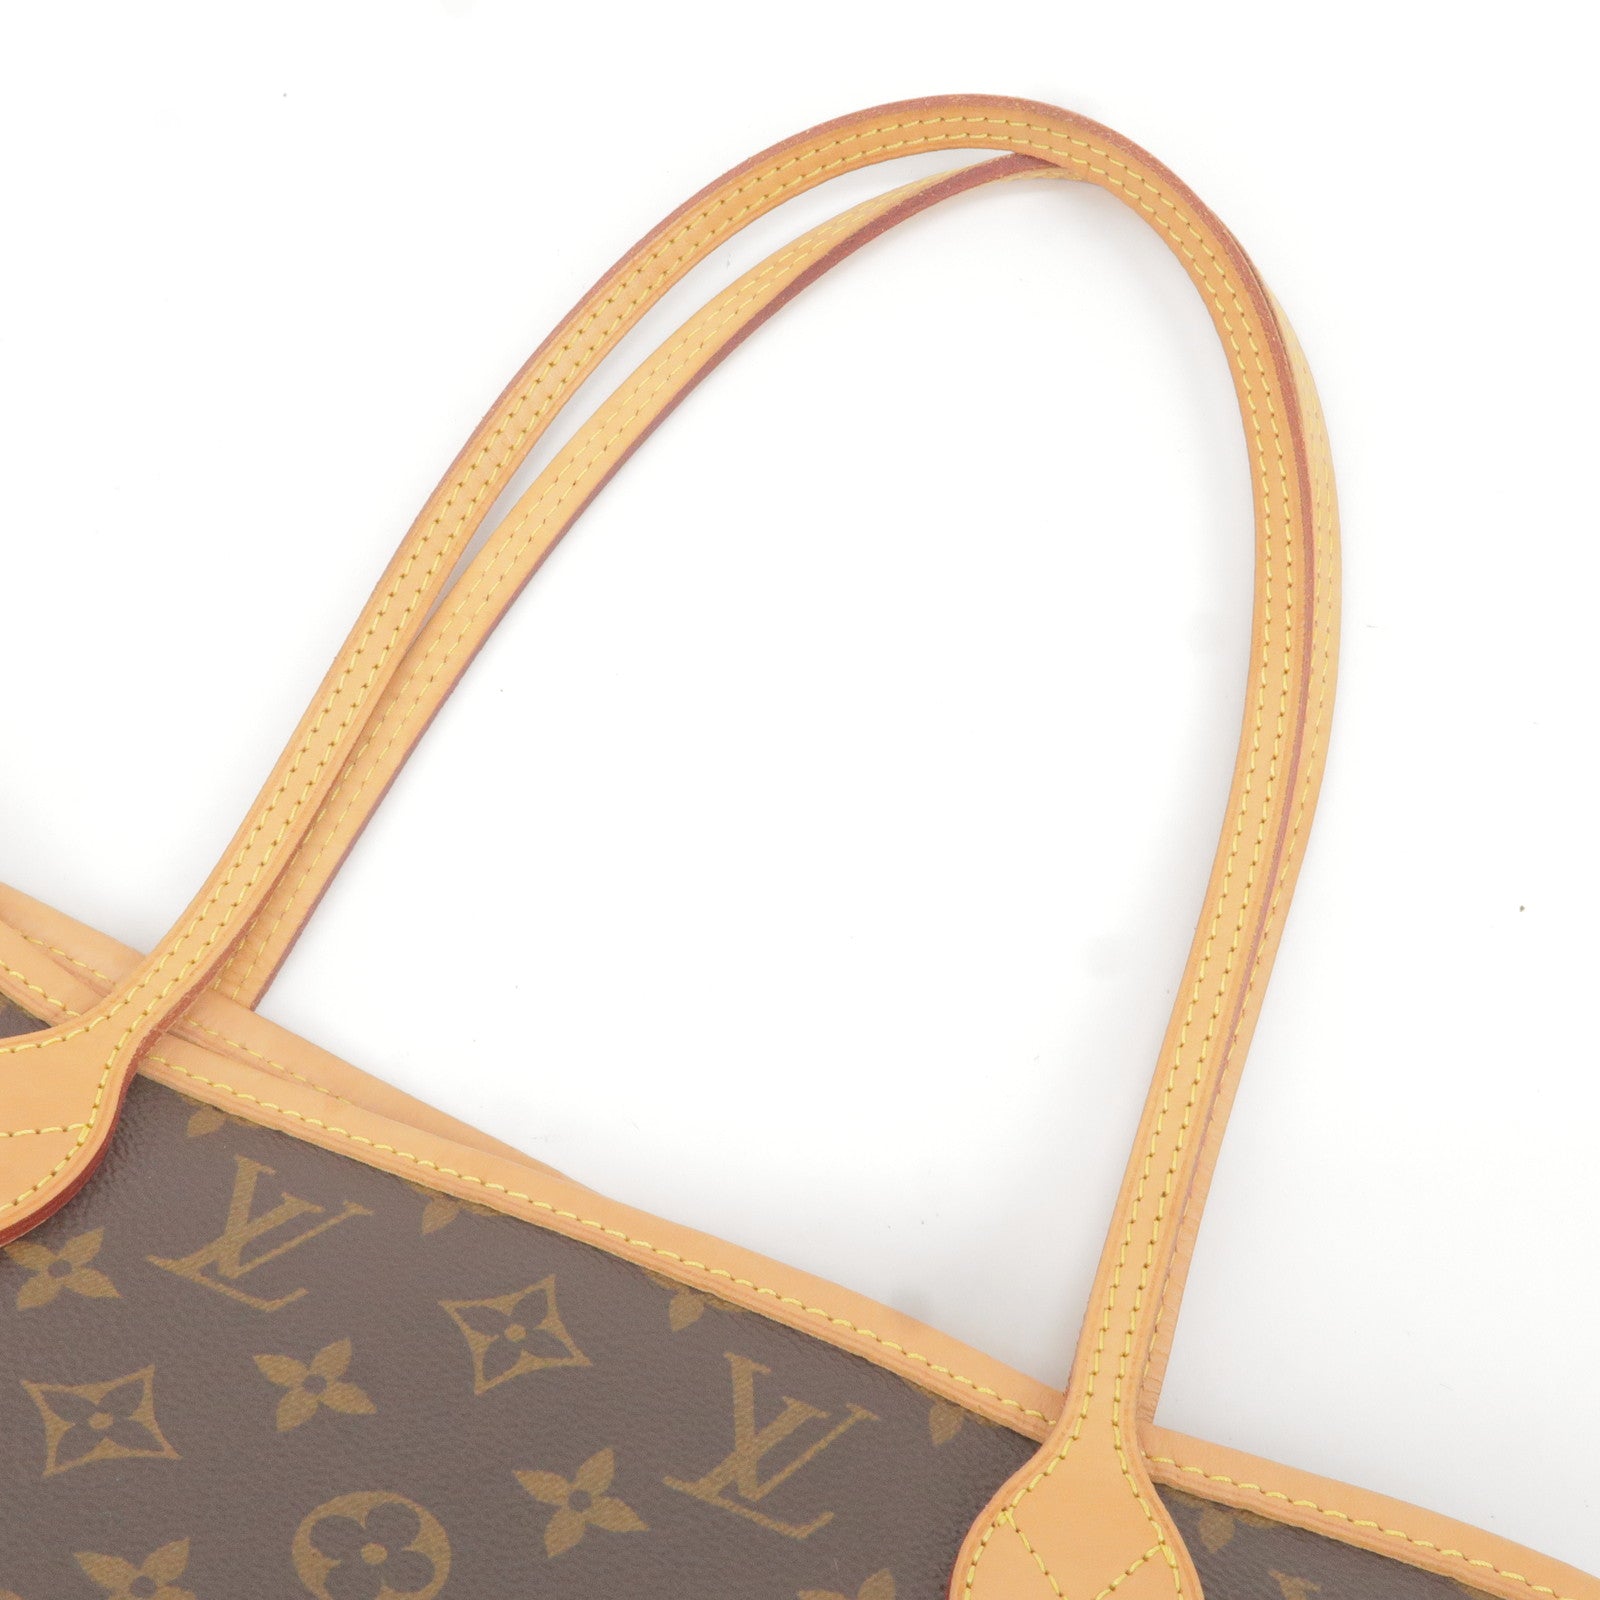 Shop Louis Vuitton NEVERFULL Neverfull mm (M41177, M40995, M41178) by  OceanPalace